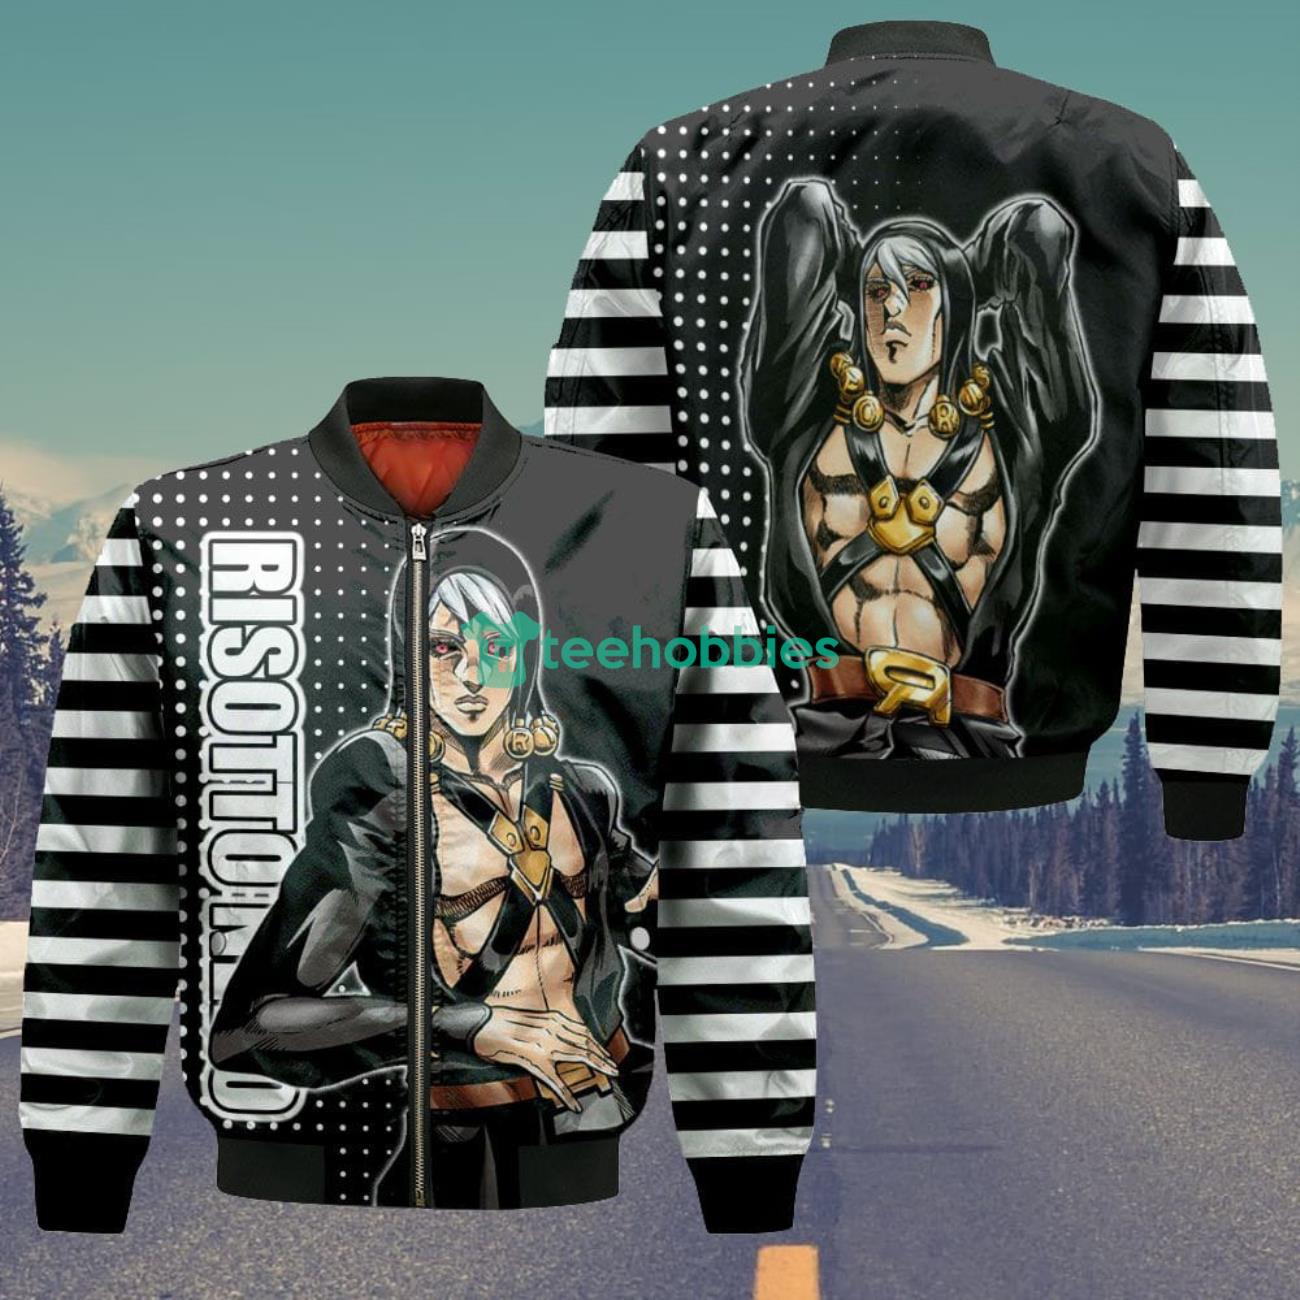 Risotto Nero All Over Printed 3D Shirt Custom Anime Fans JJBAs Product Photo 4 Product photo 2